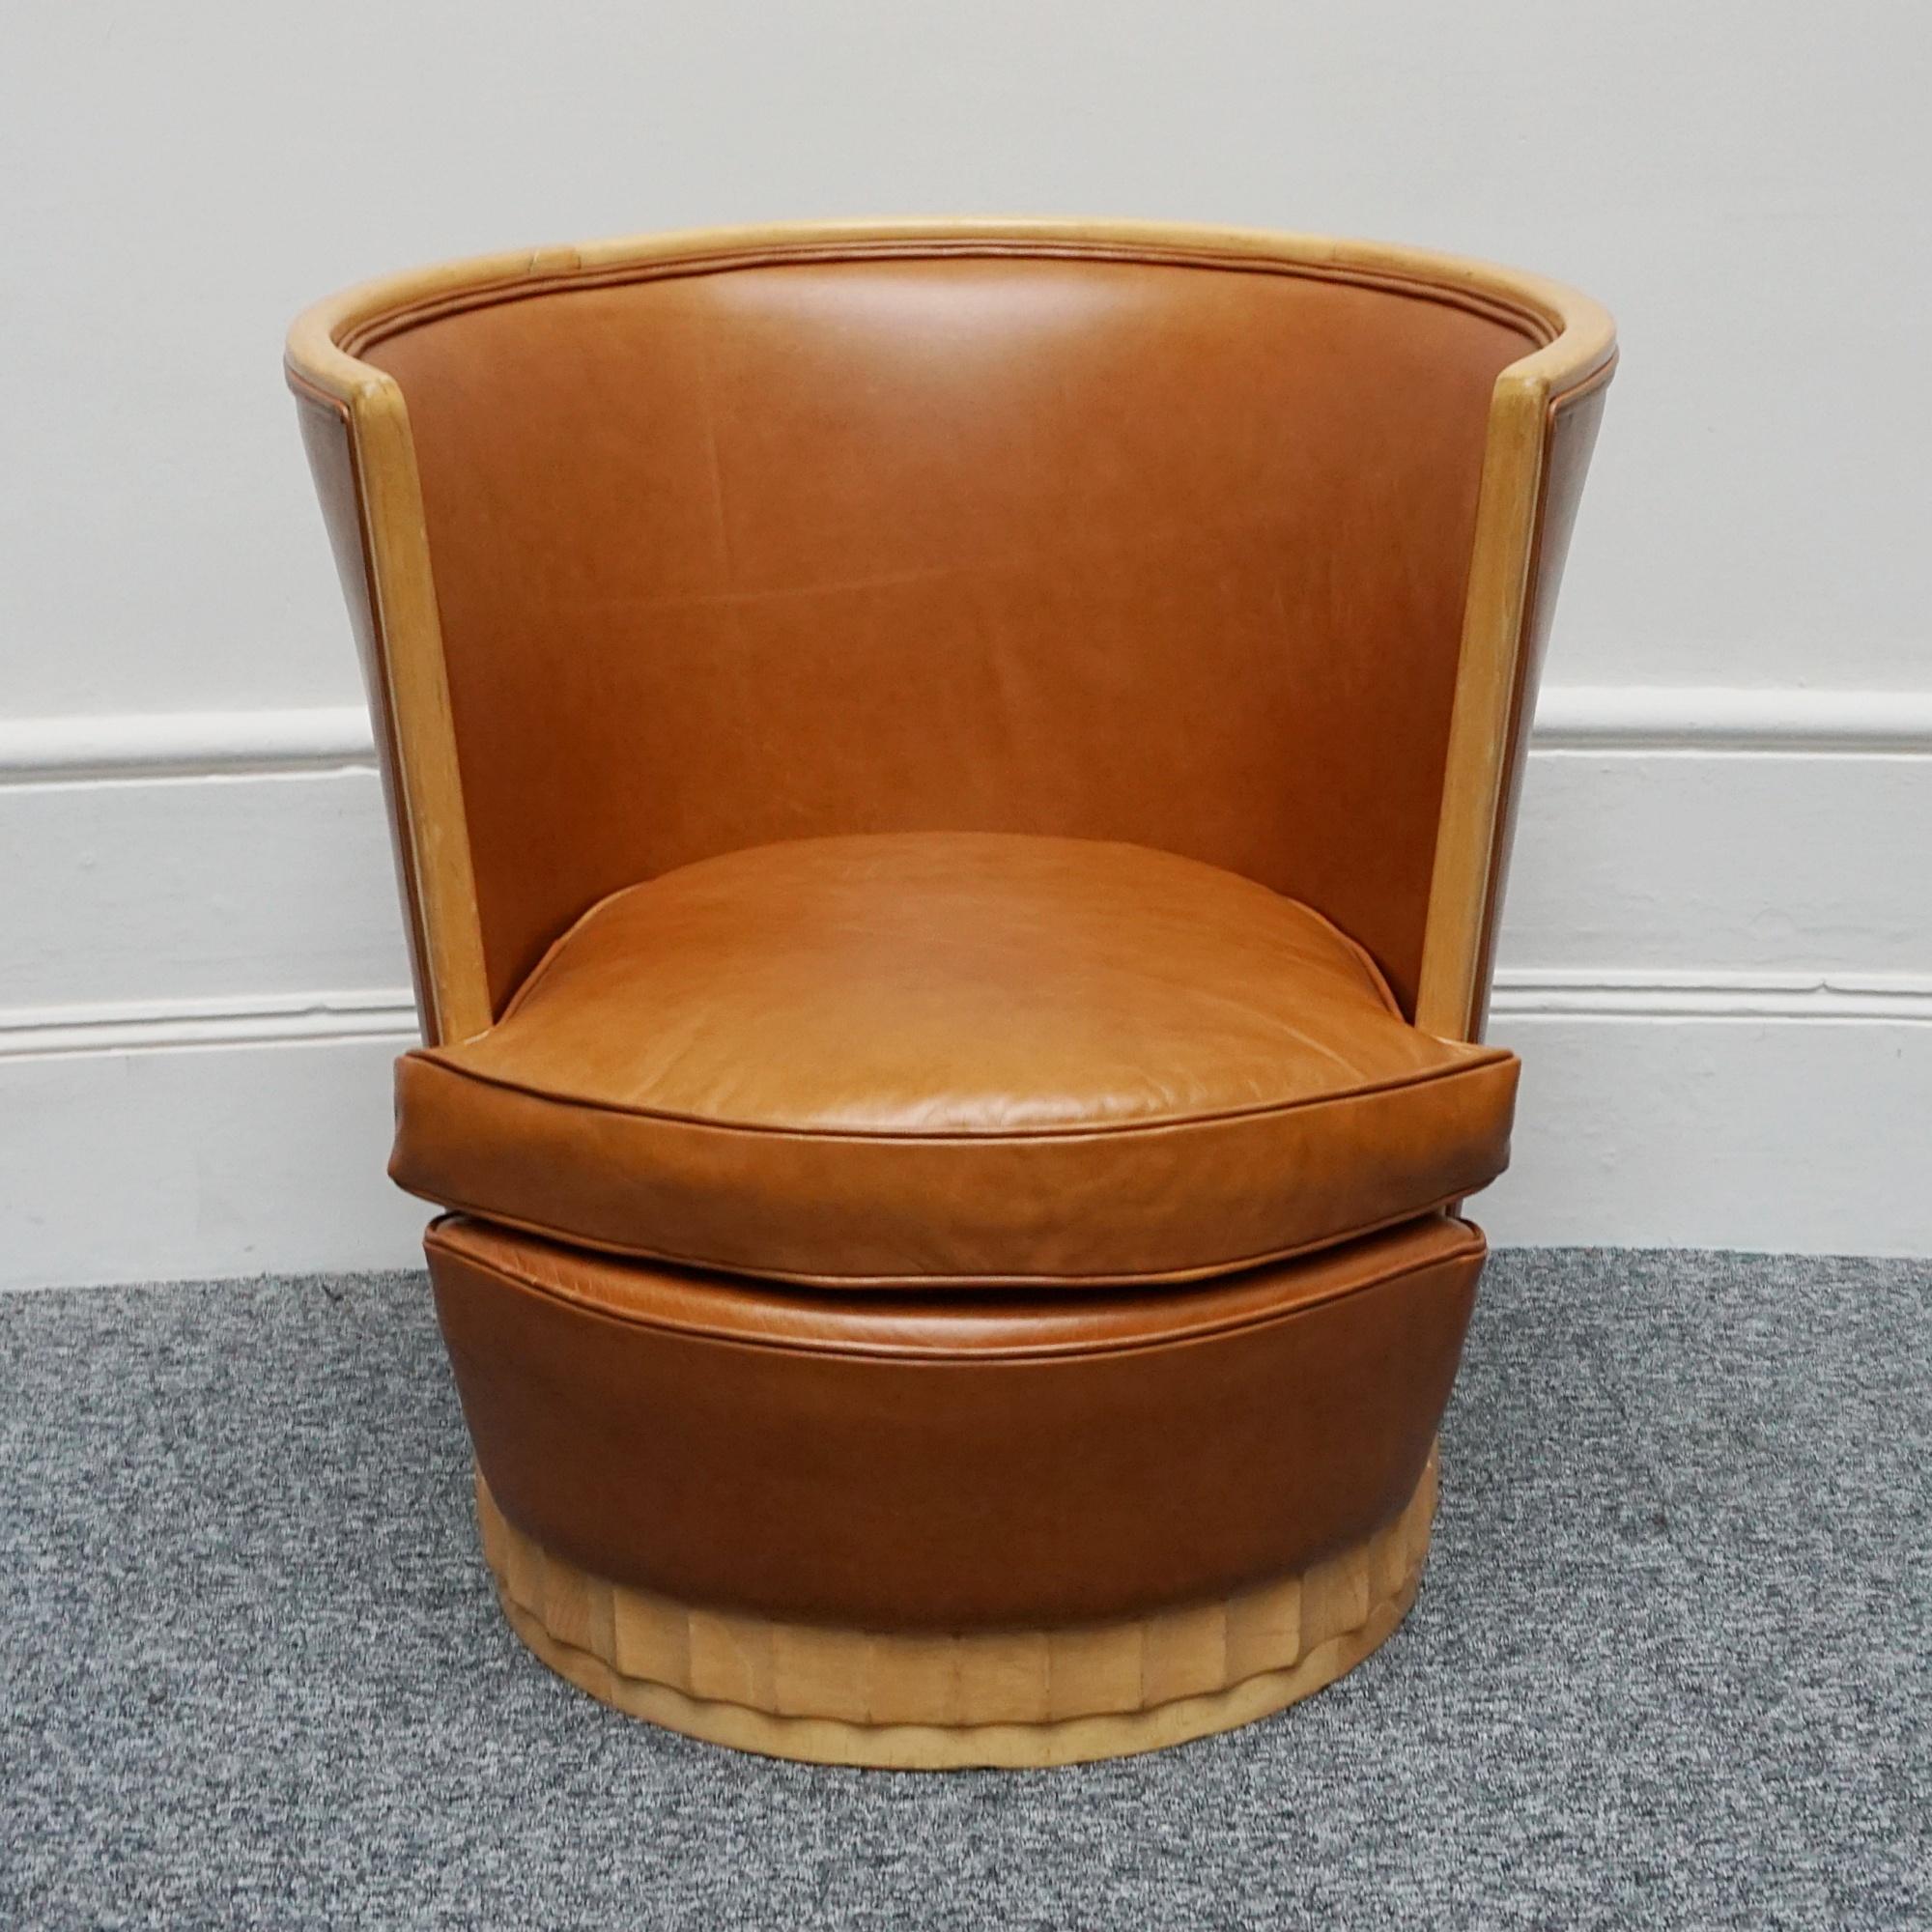 A Pair of Satin Birch and Brown Leather Upholstered Art Deco Tub Chairs 1